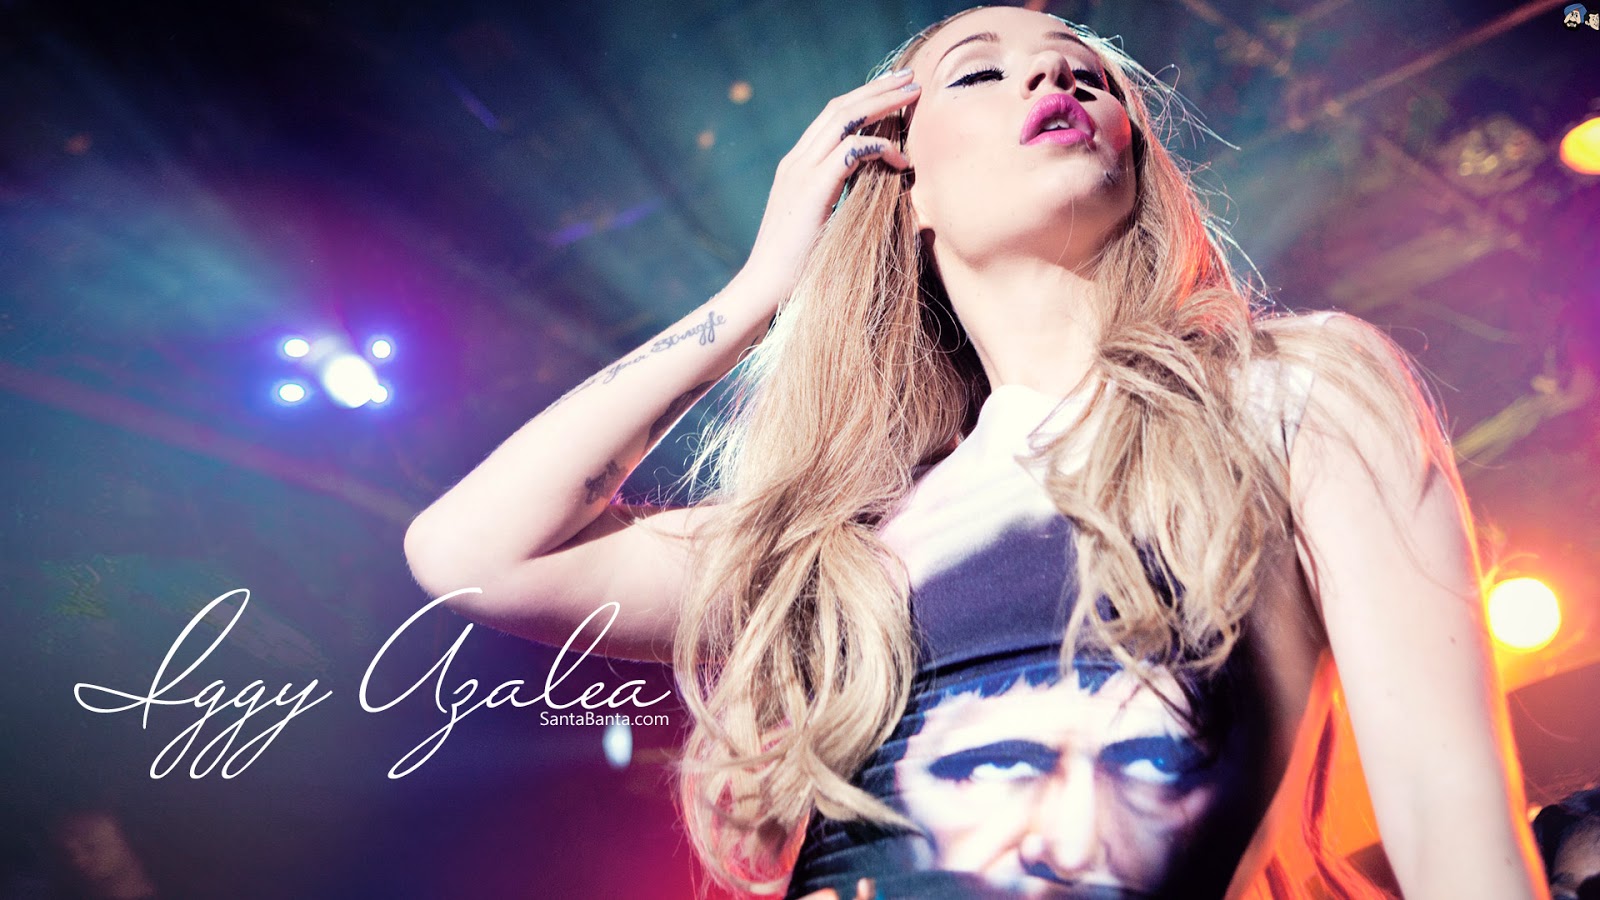 Iggy Azalea HD Wallpapers | Most beautiful places in the world | Download Free Wallpapers